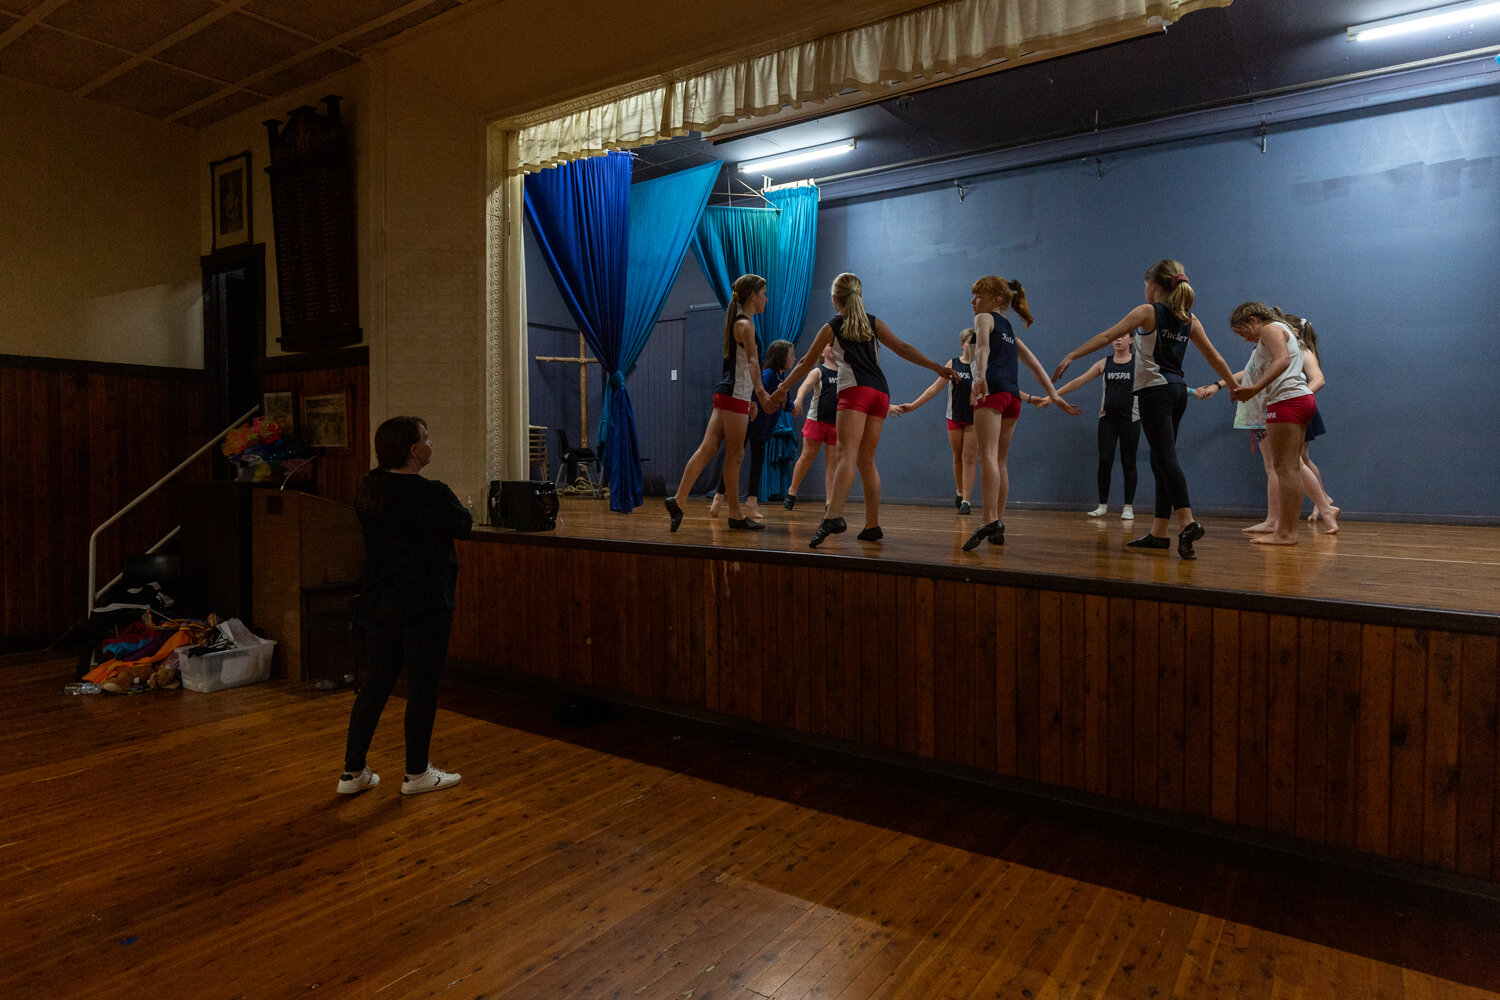  A dance class in Tottenham, a source of fun for young people who have been dealing with the effects of a drought, the pandemic and the mouse plague. 